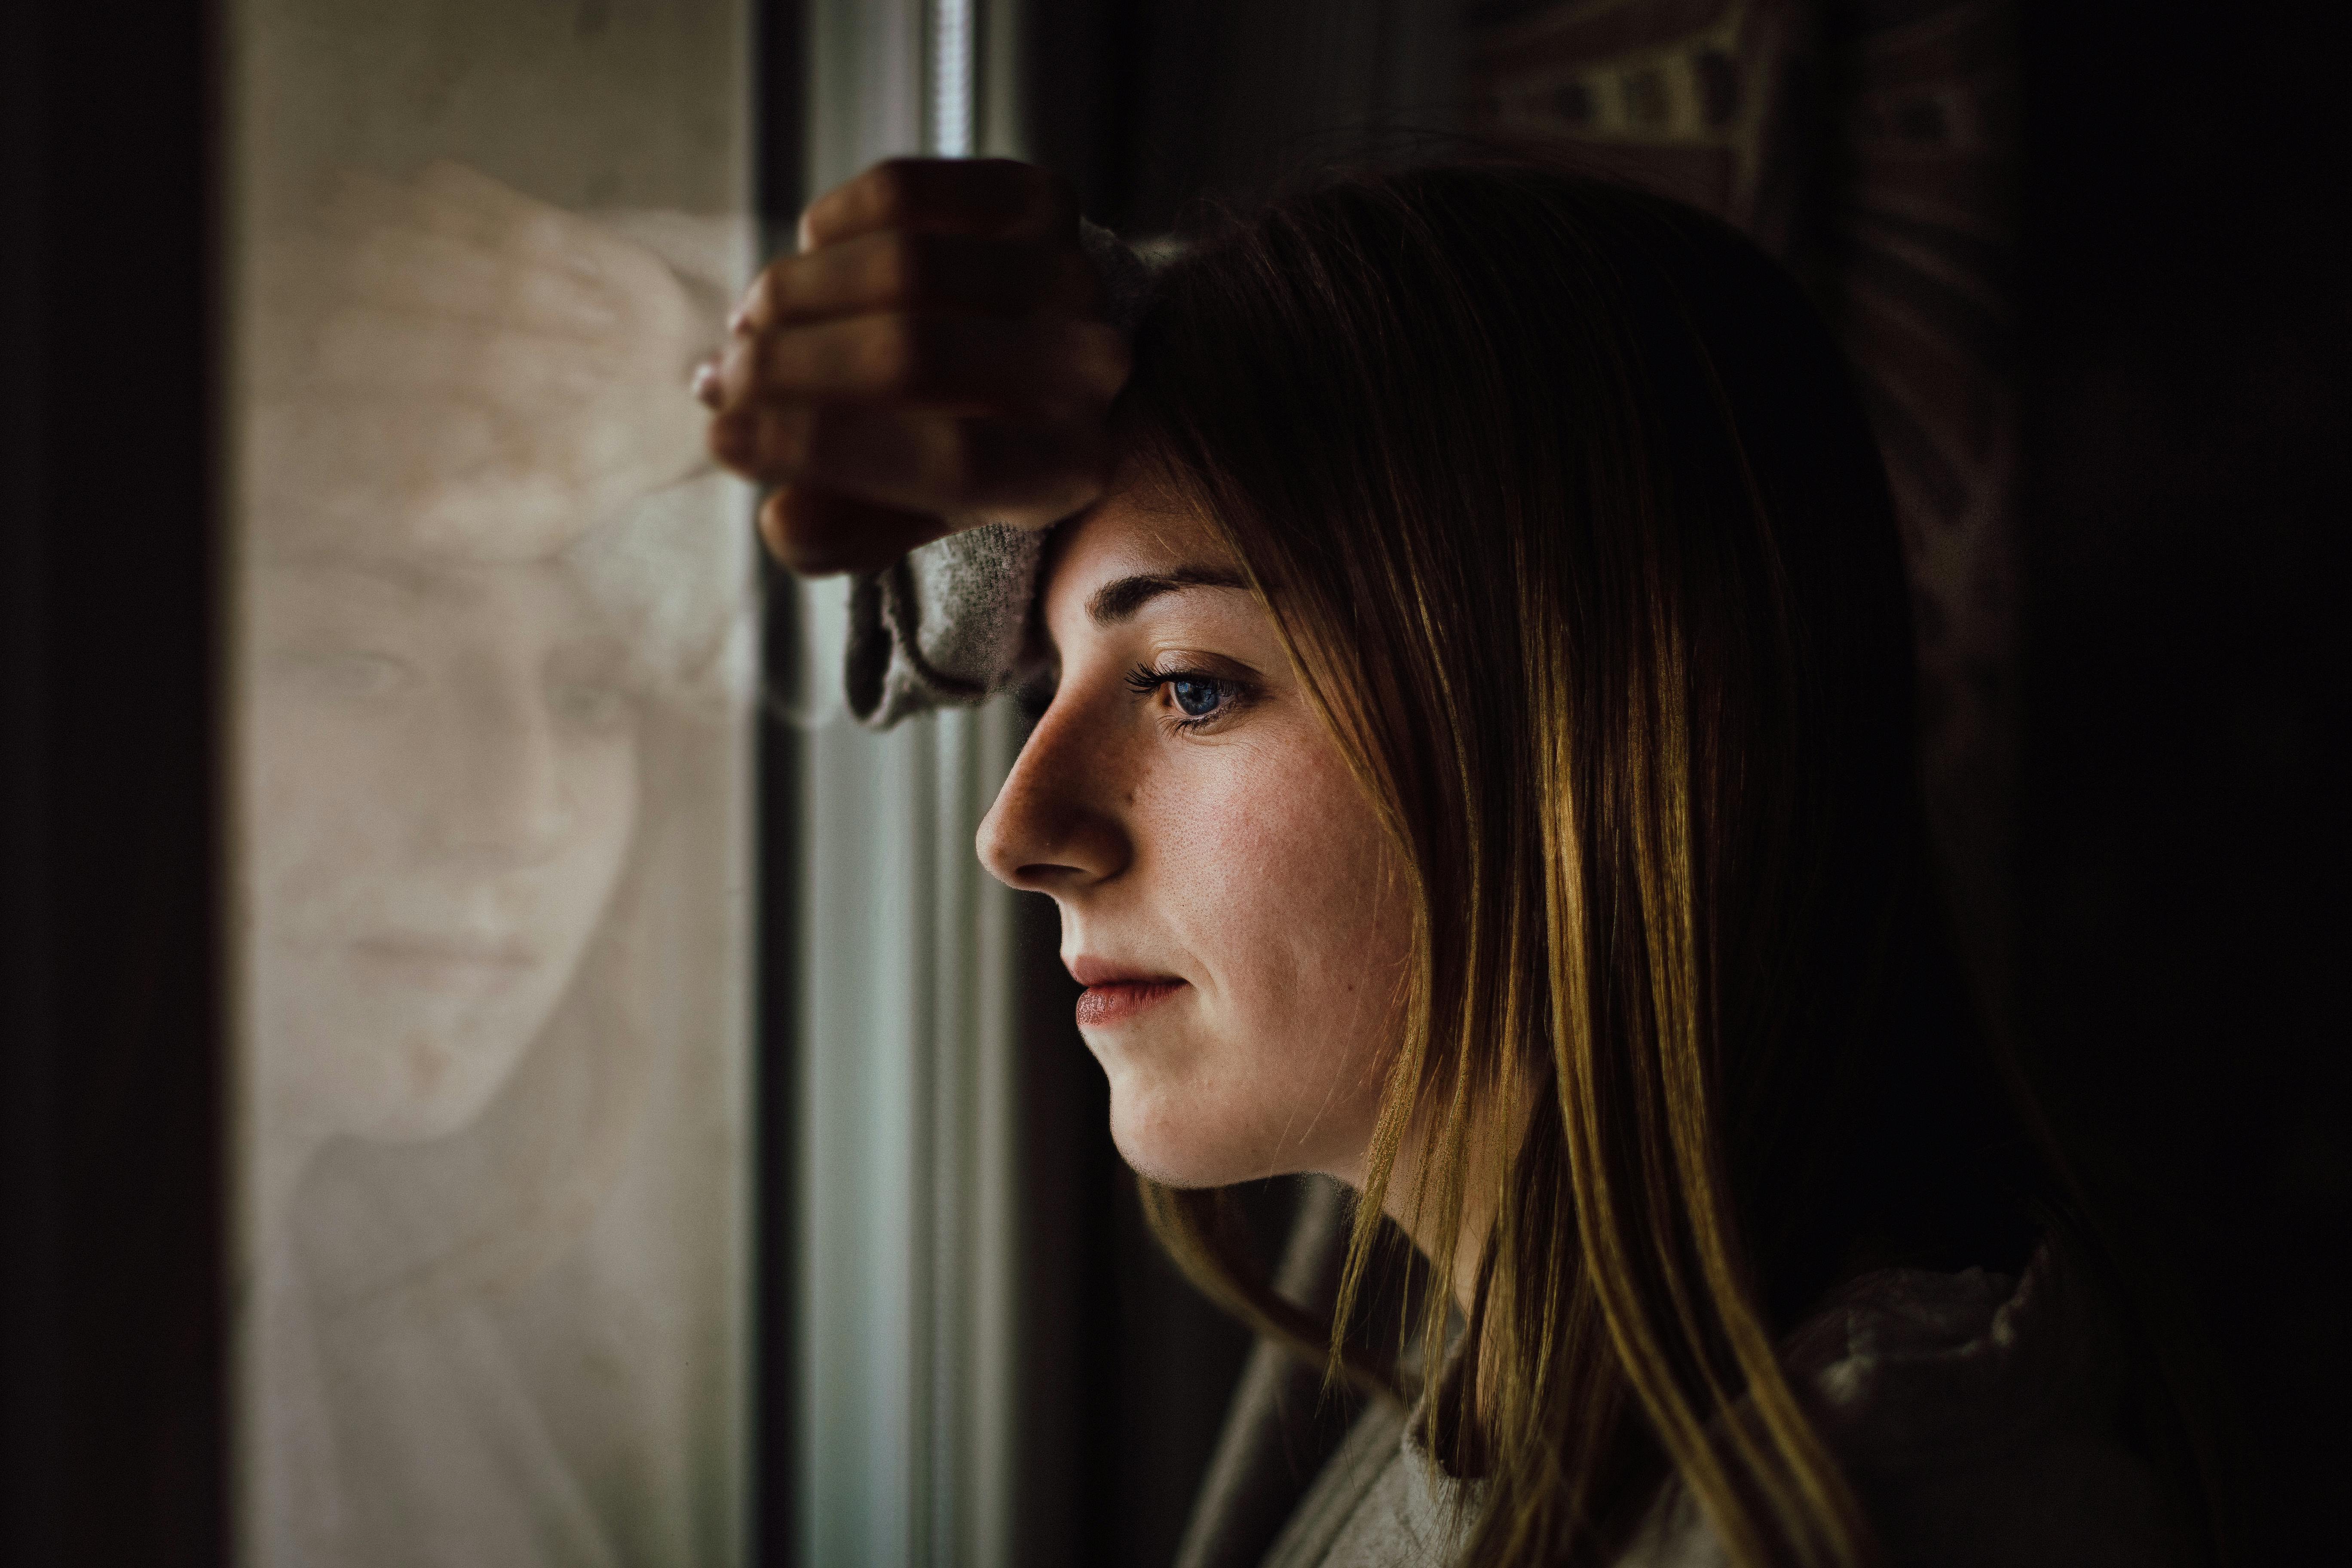 A woman looking out the window and lost in thought | Source: Pexels